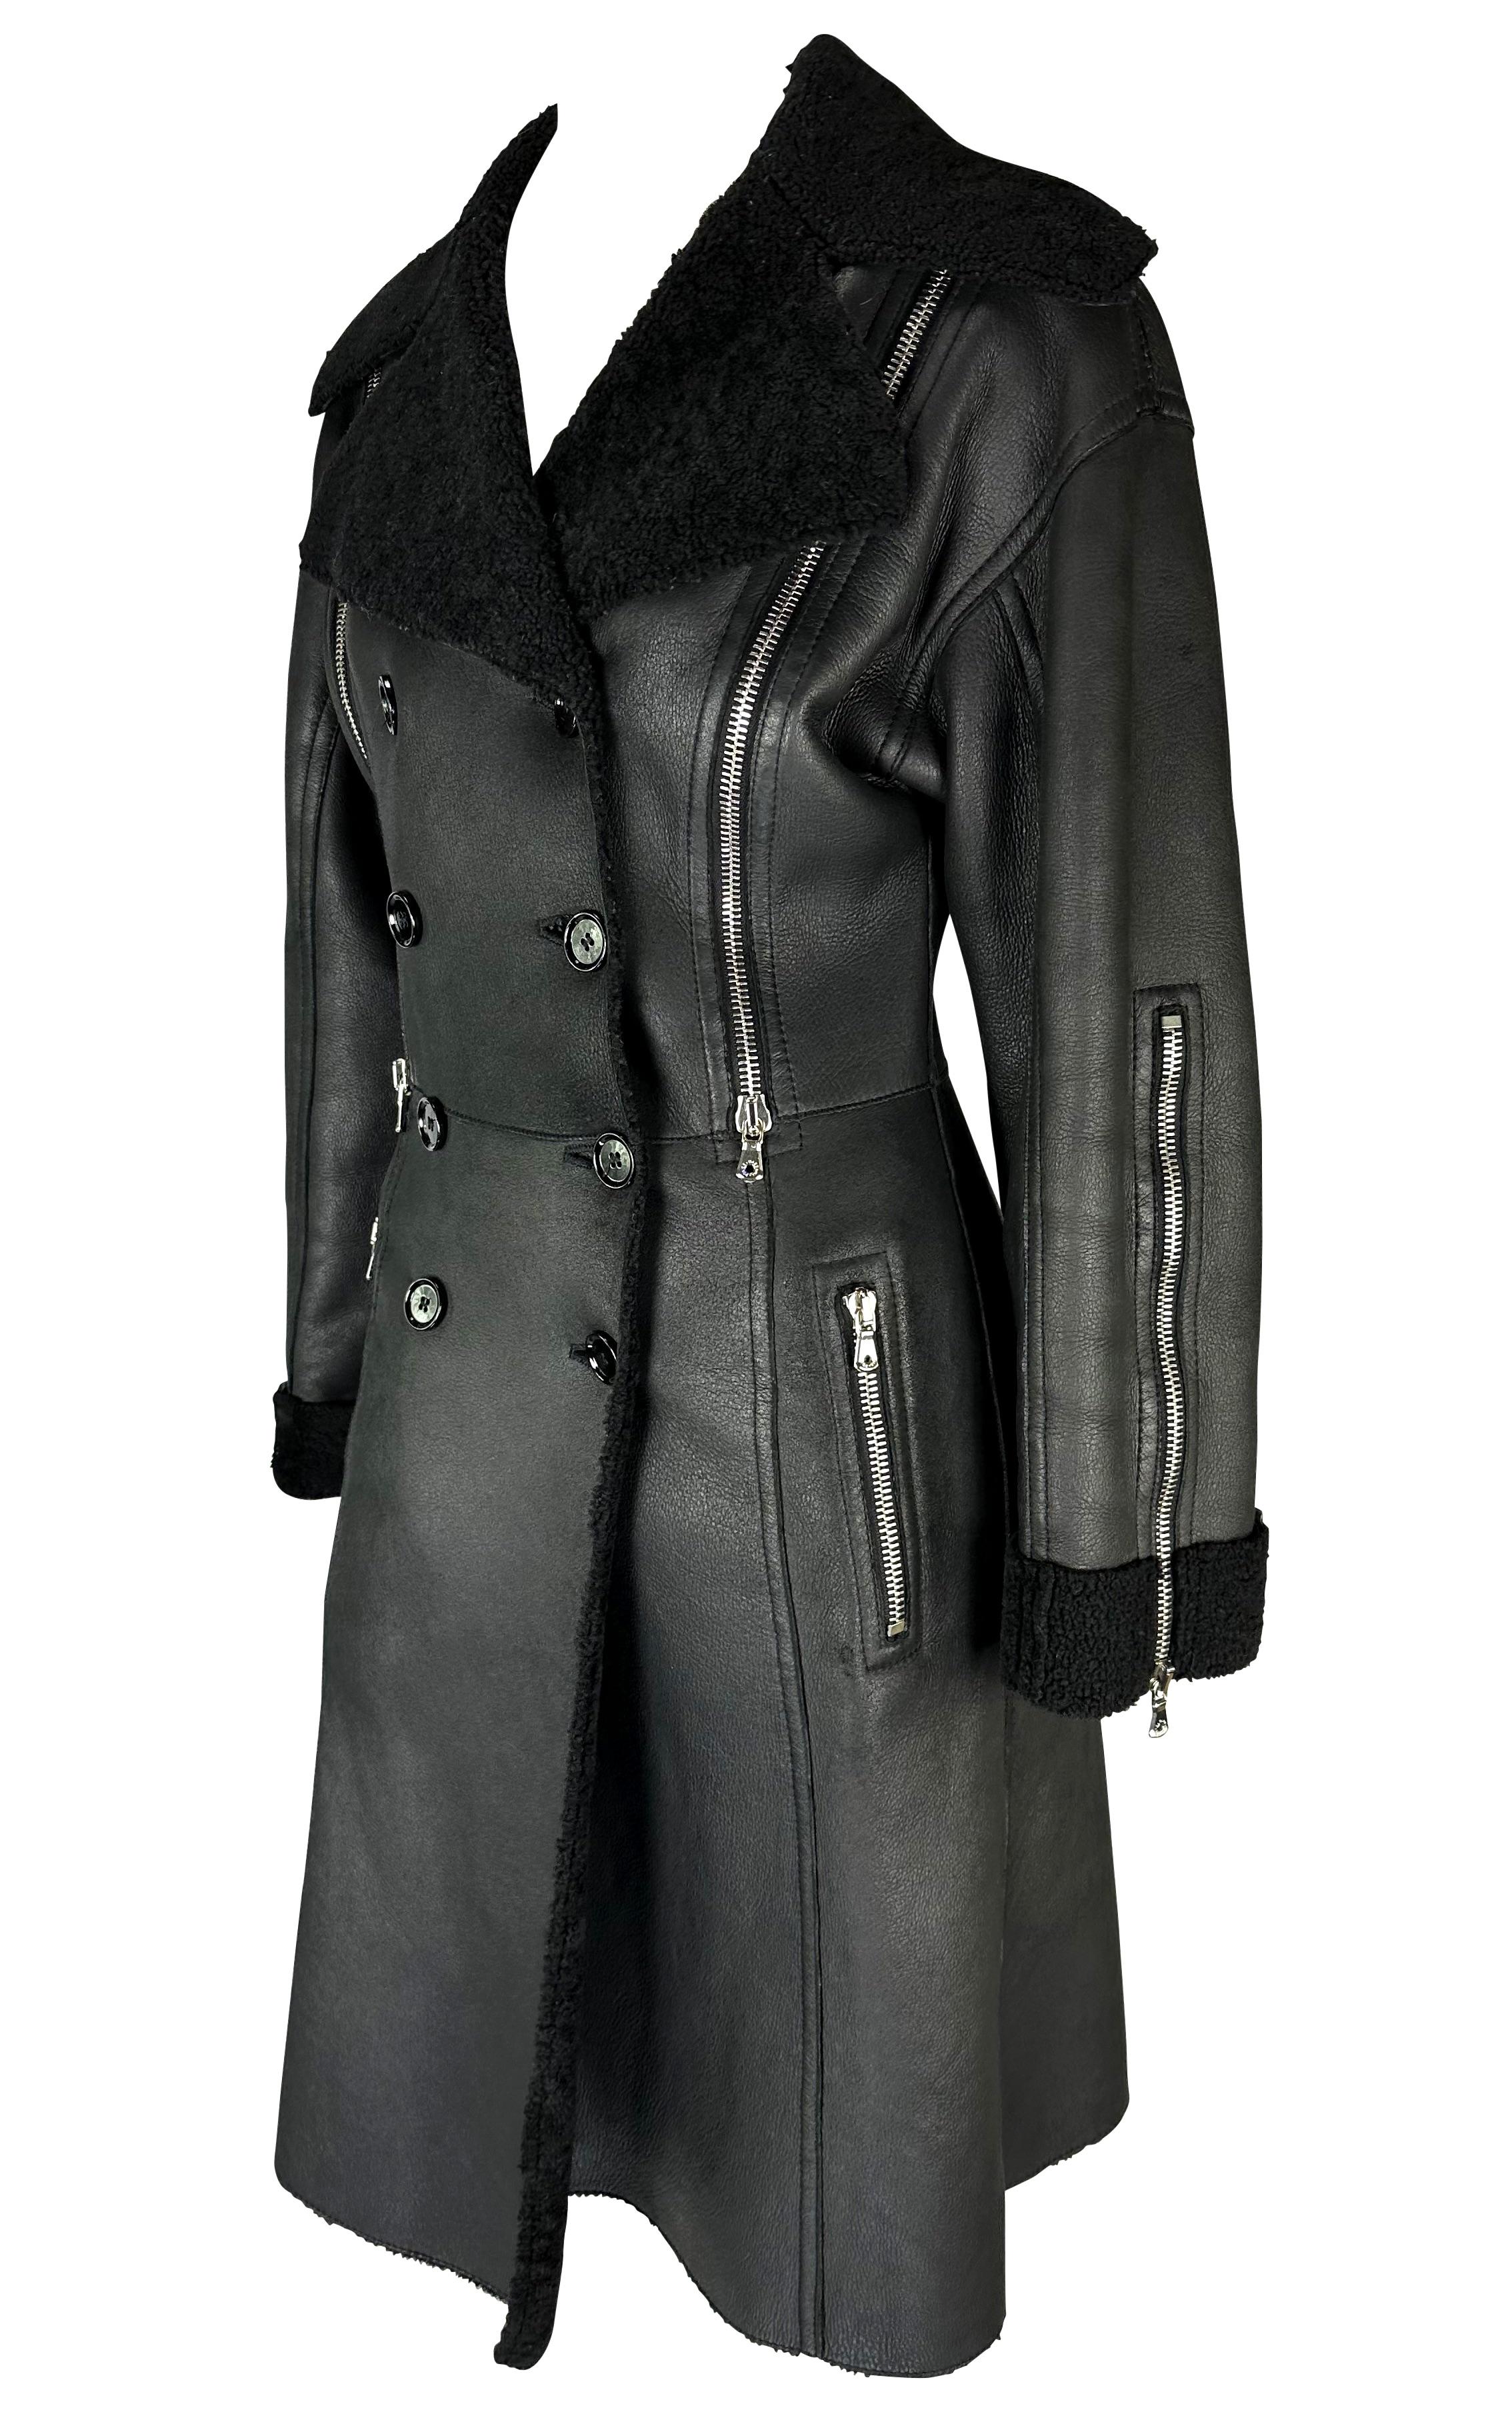 Presenting a fabulous black shearling double-breasted Dolce and Gabbana coat. From the Fall/Winter 2003 collection, this coat features a leather exterior with a shearling lining that is exposed at the lapel and cuffs. The jacket is made complete